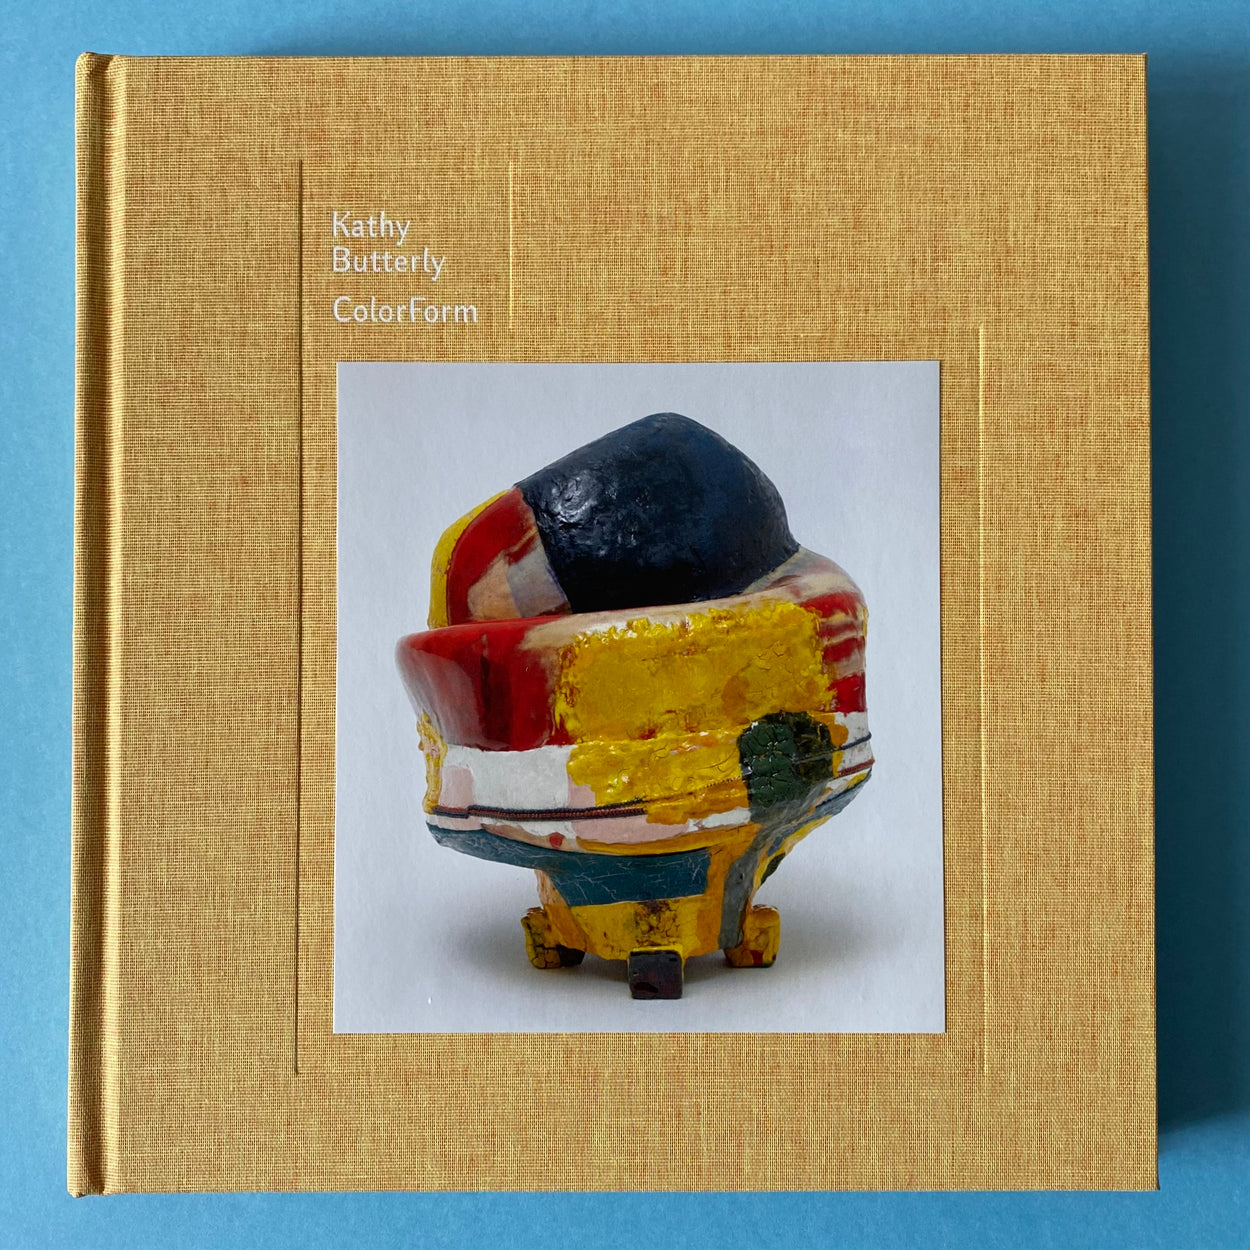 Kathy Butterly: Colorform Hard Cover Book against a pale blue background